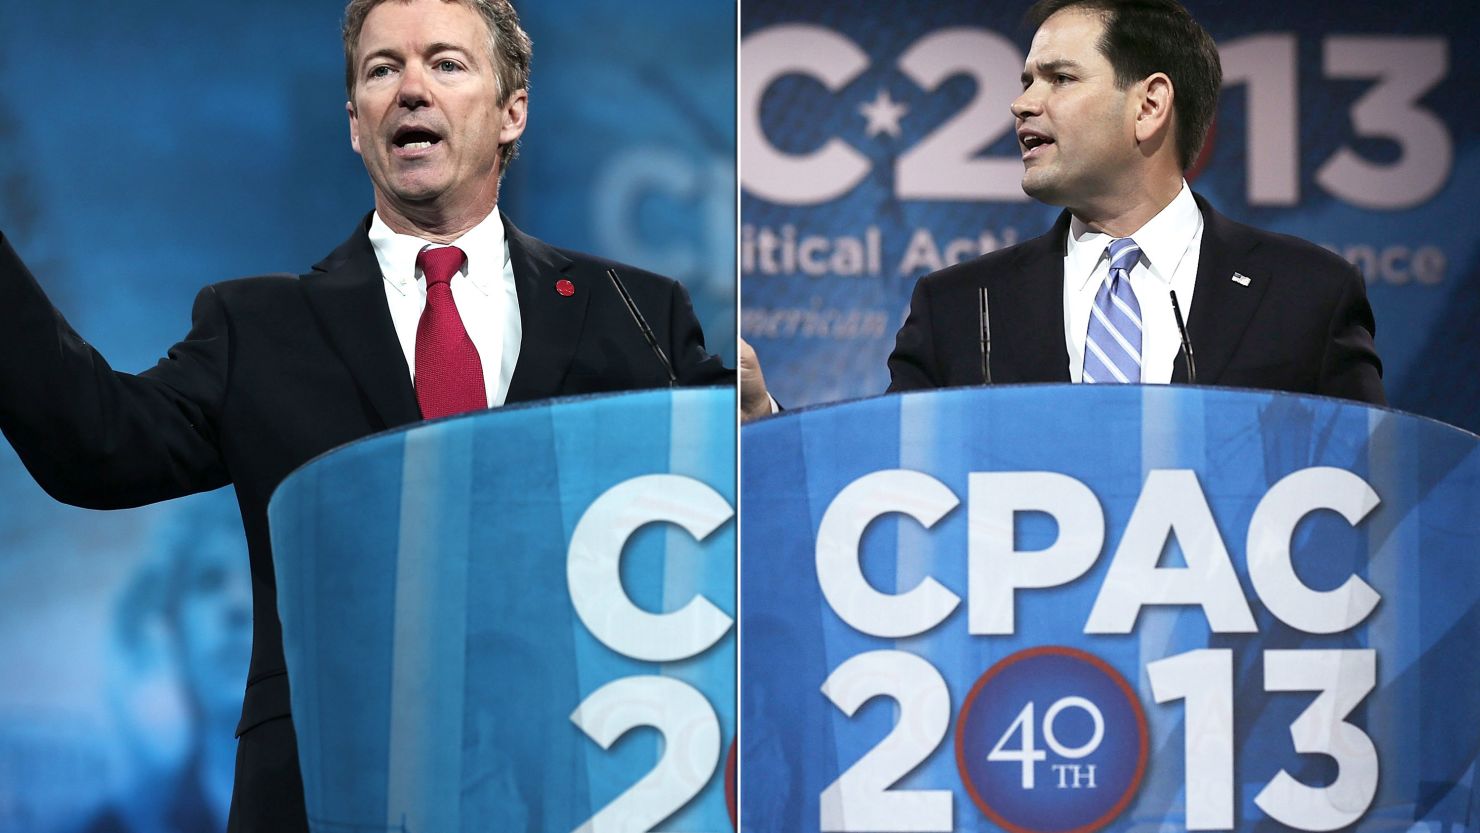 Sens. Rand Paul and Marco Rubio spoke at the CPAC convention just outside of Washington, D.C. on Thursday.